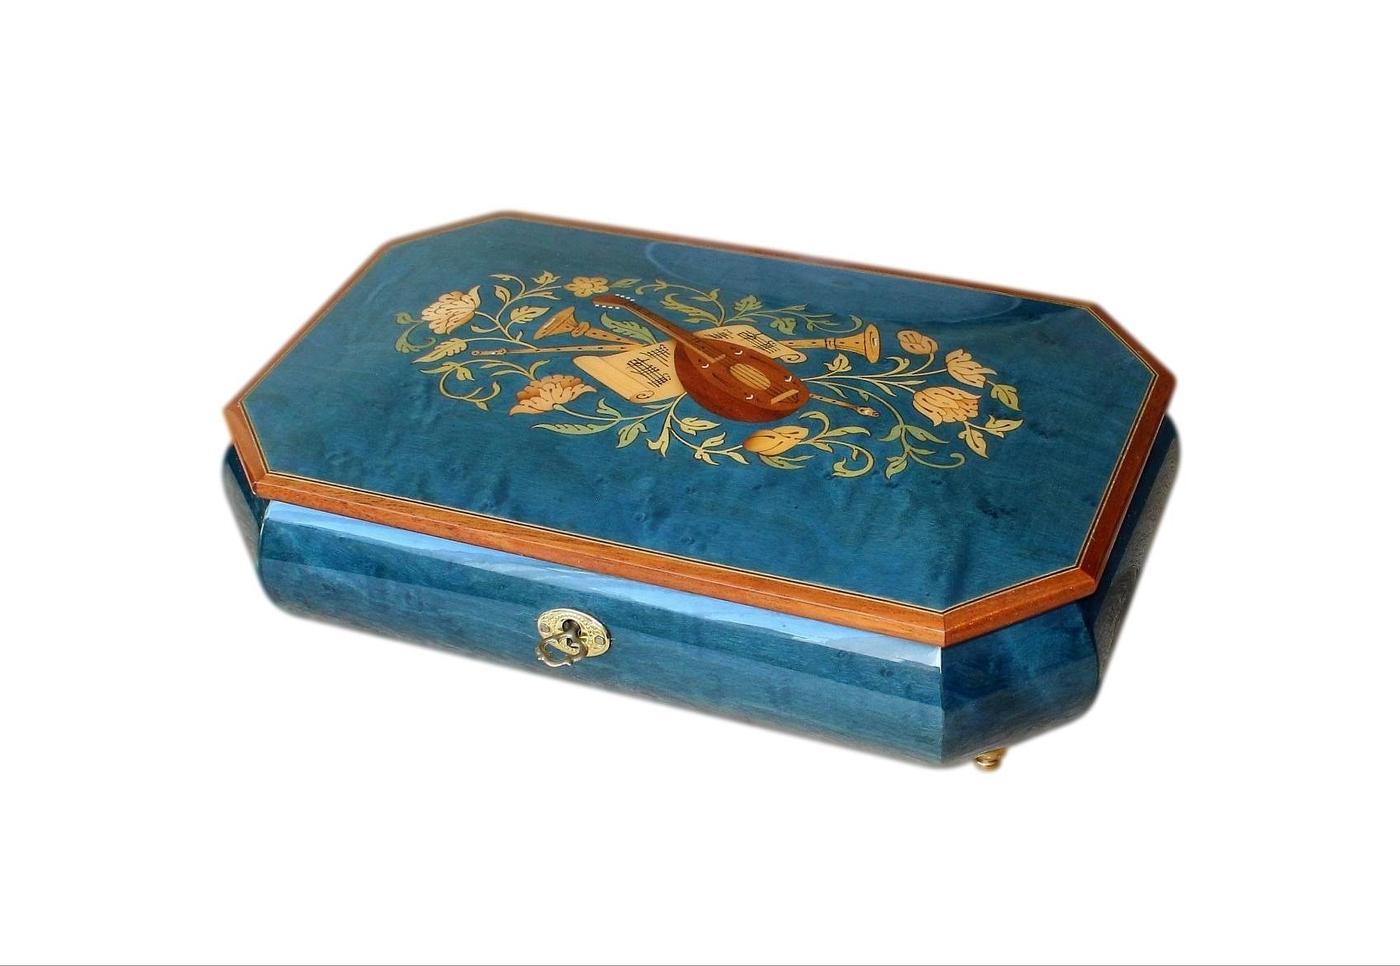 Stunning Sorrento Vintage Musical Jewellery Box Enamelled And Inlaid